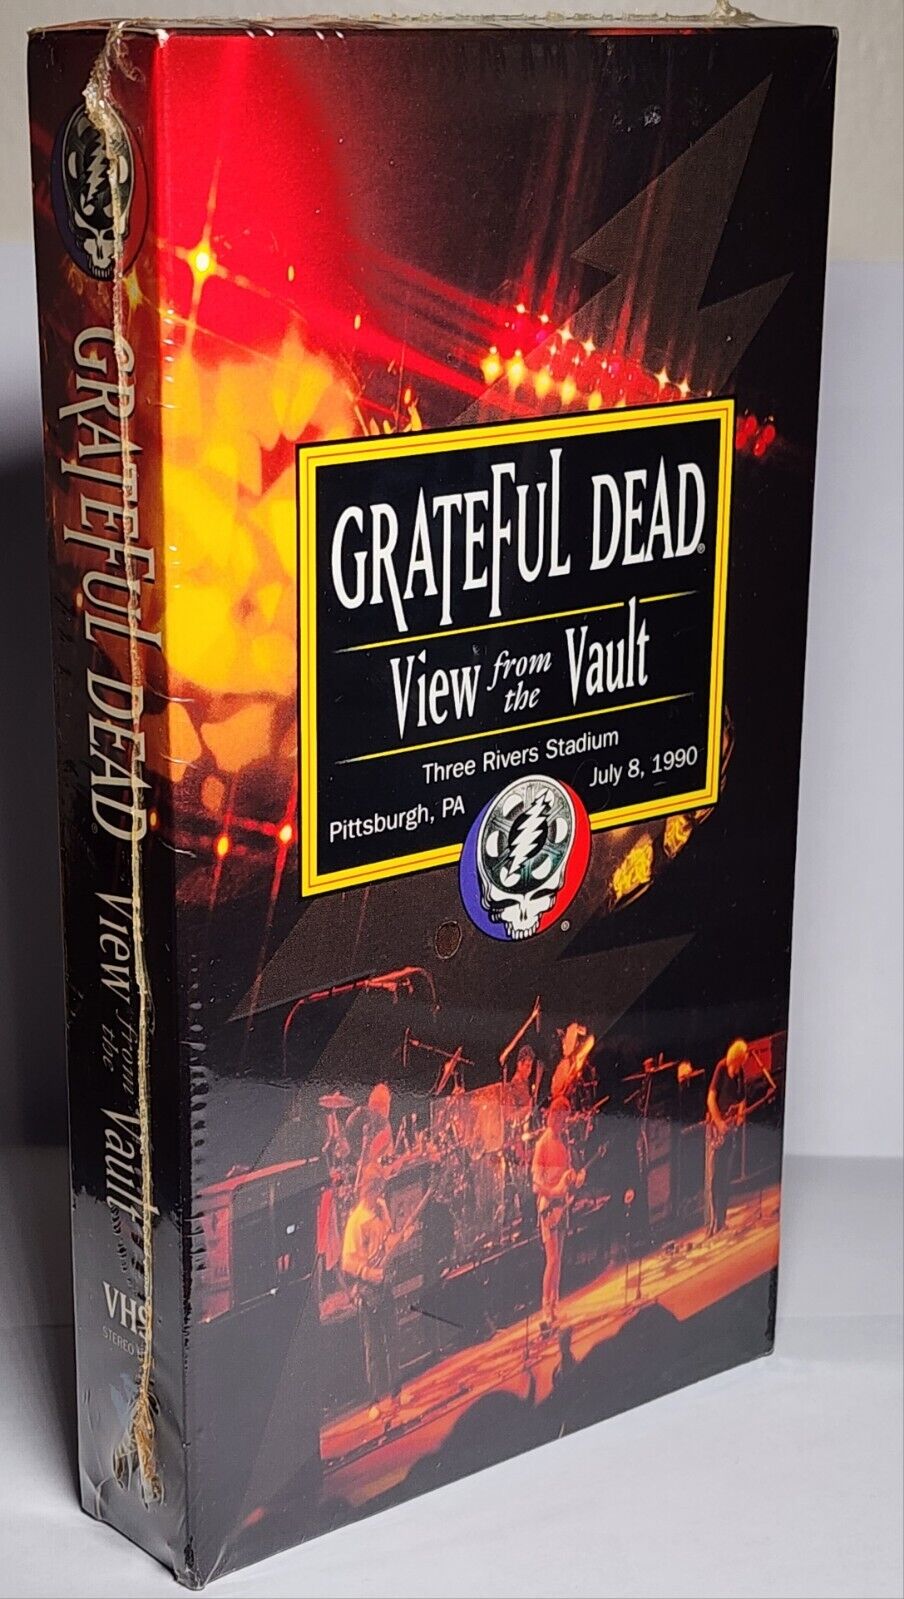 Rare Vintage Grateful Dead Jerry Garcia View From Vault VHS Tape Sealed 3 Rivers